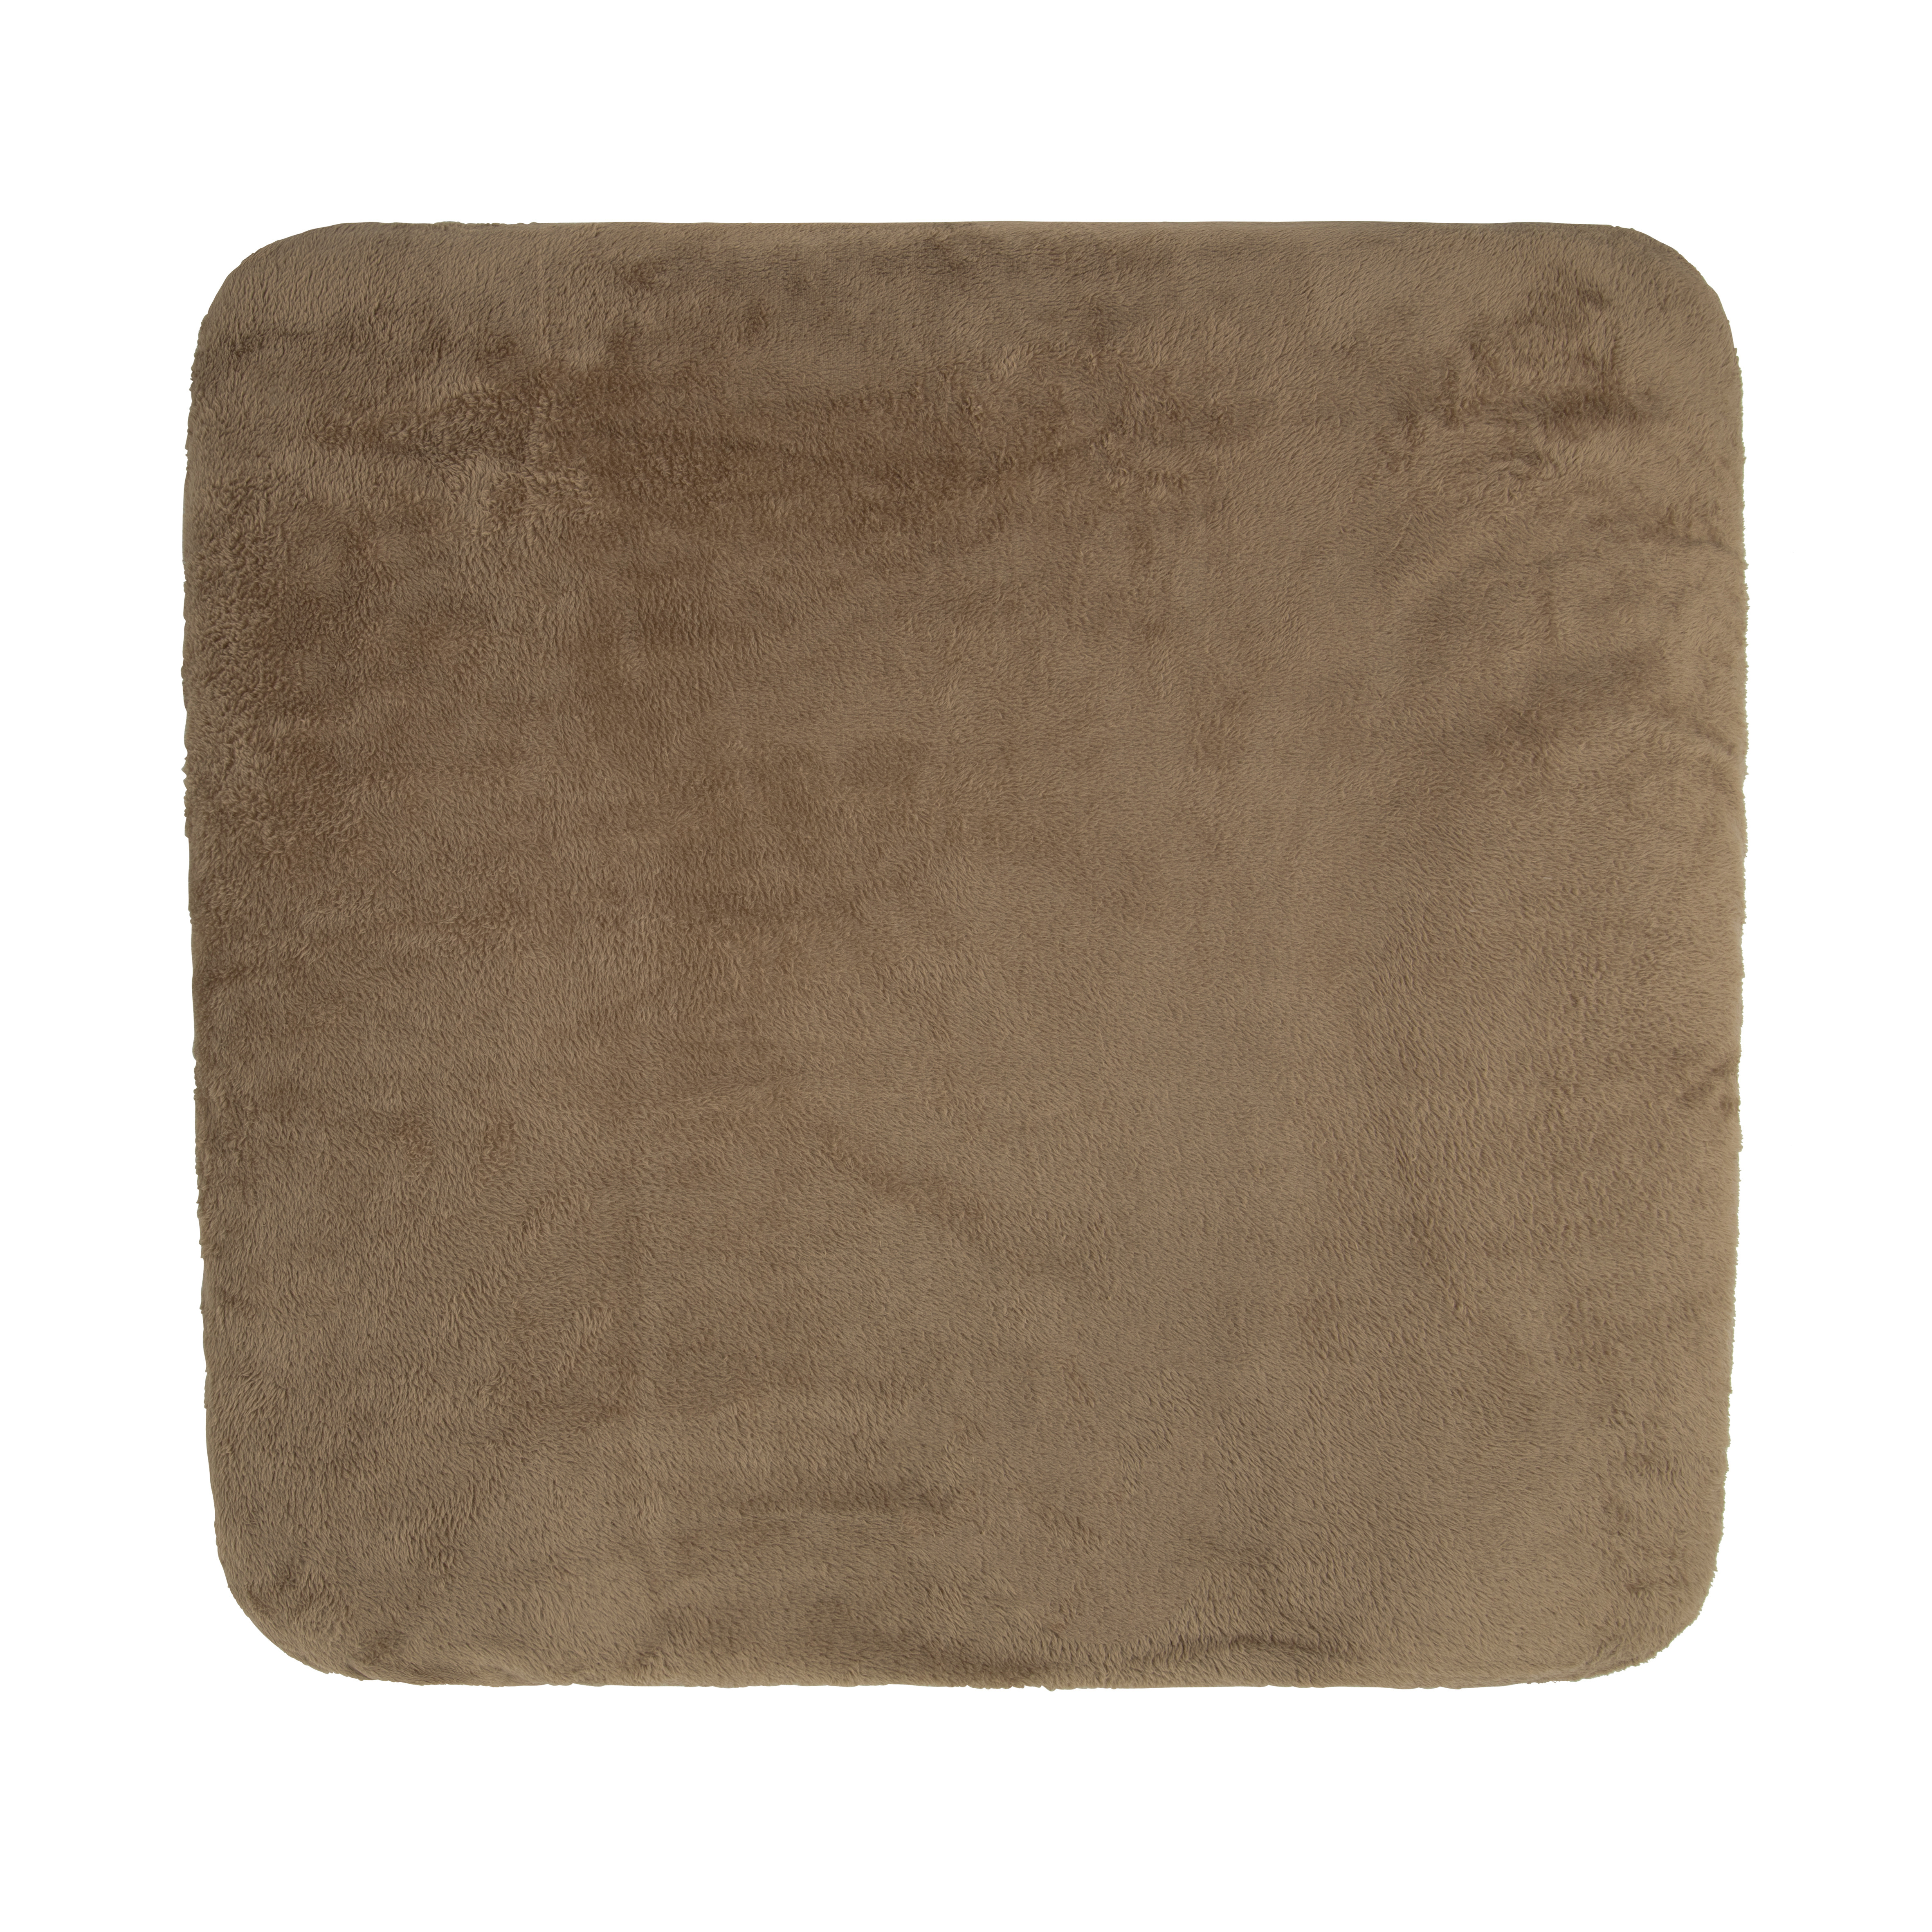 Changing pad cover Cozy clay - 75x85